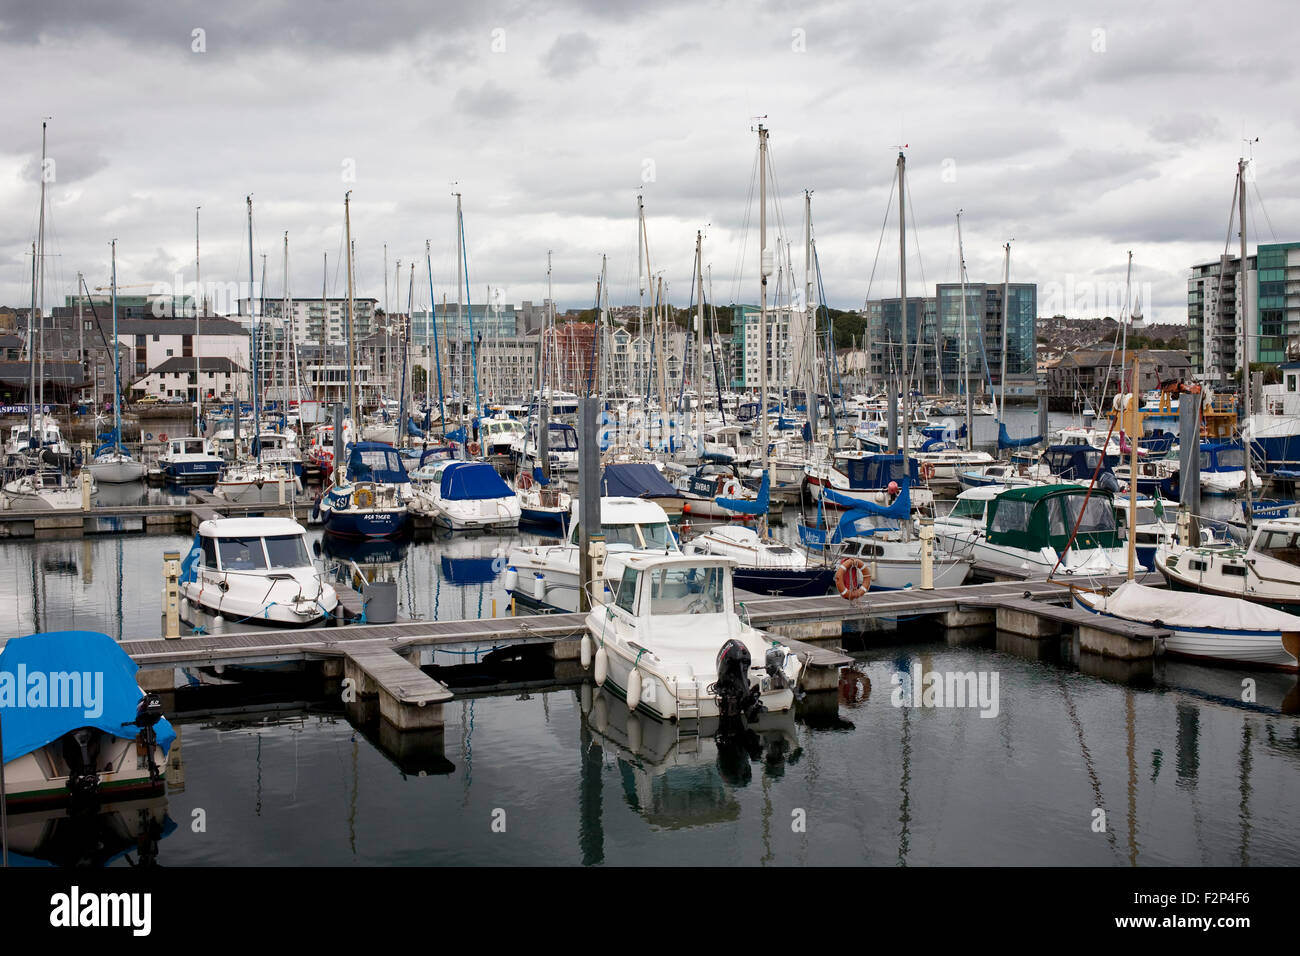 boats and yachts moored at Sutton harbour, Plymouth, uk Stock Photo